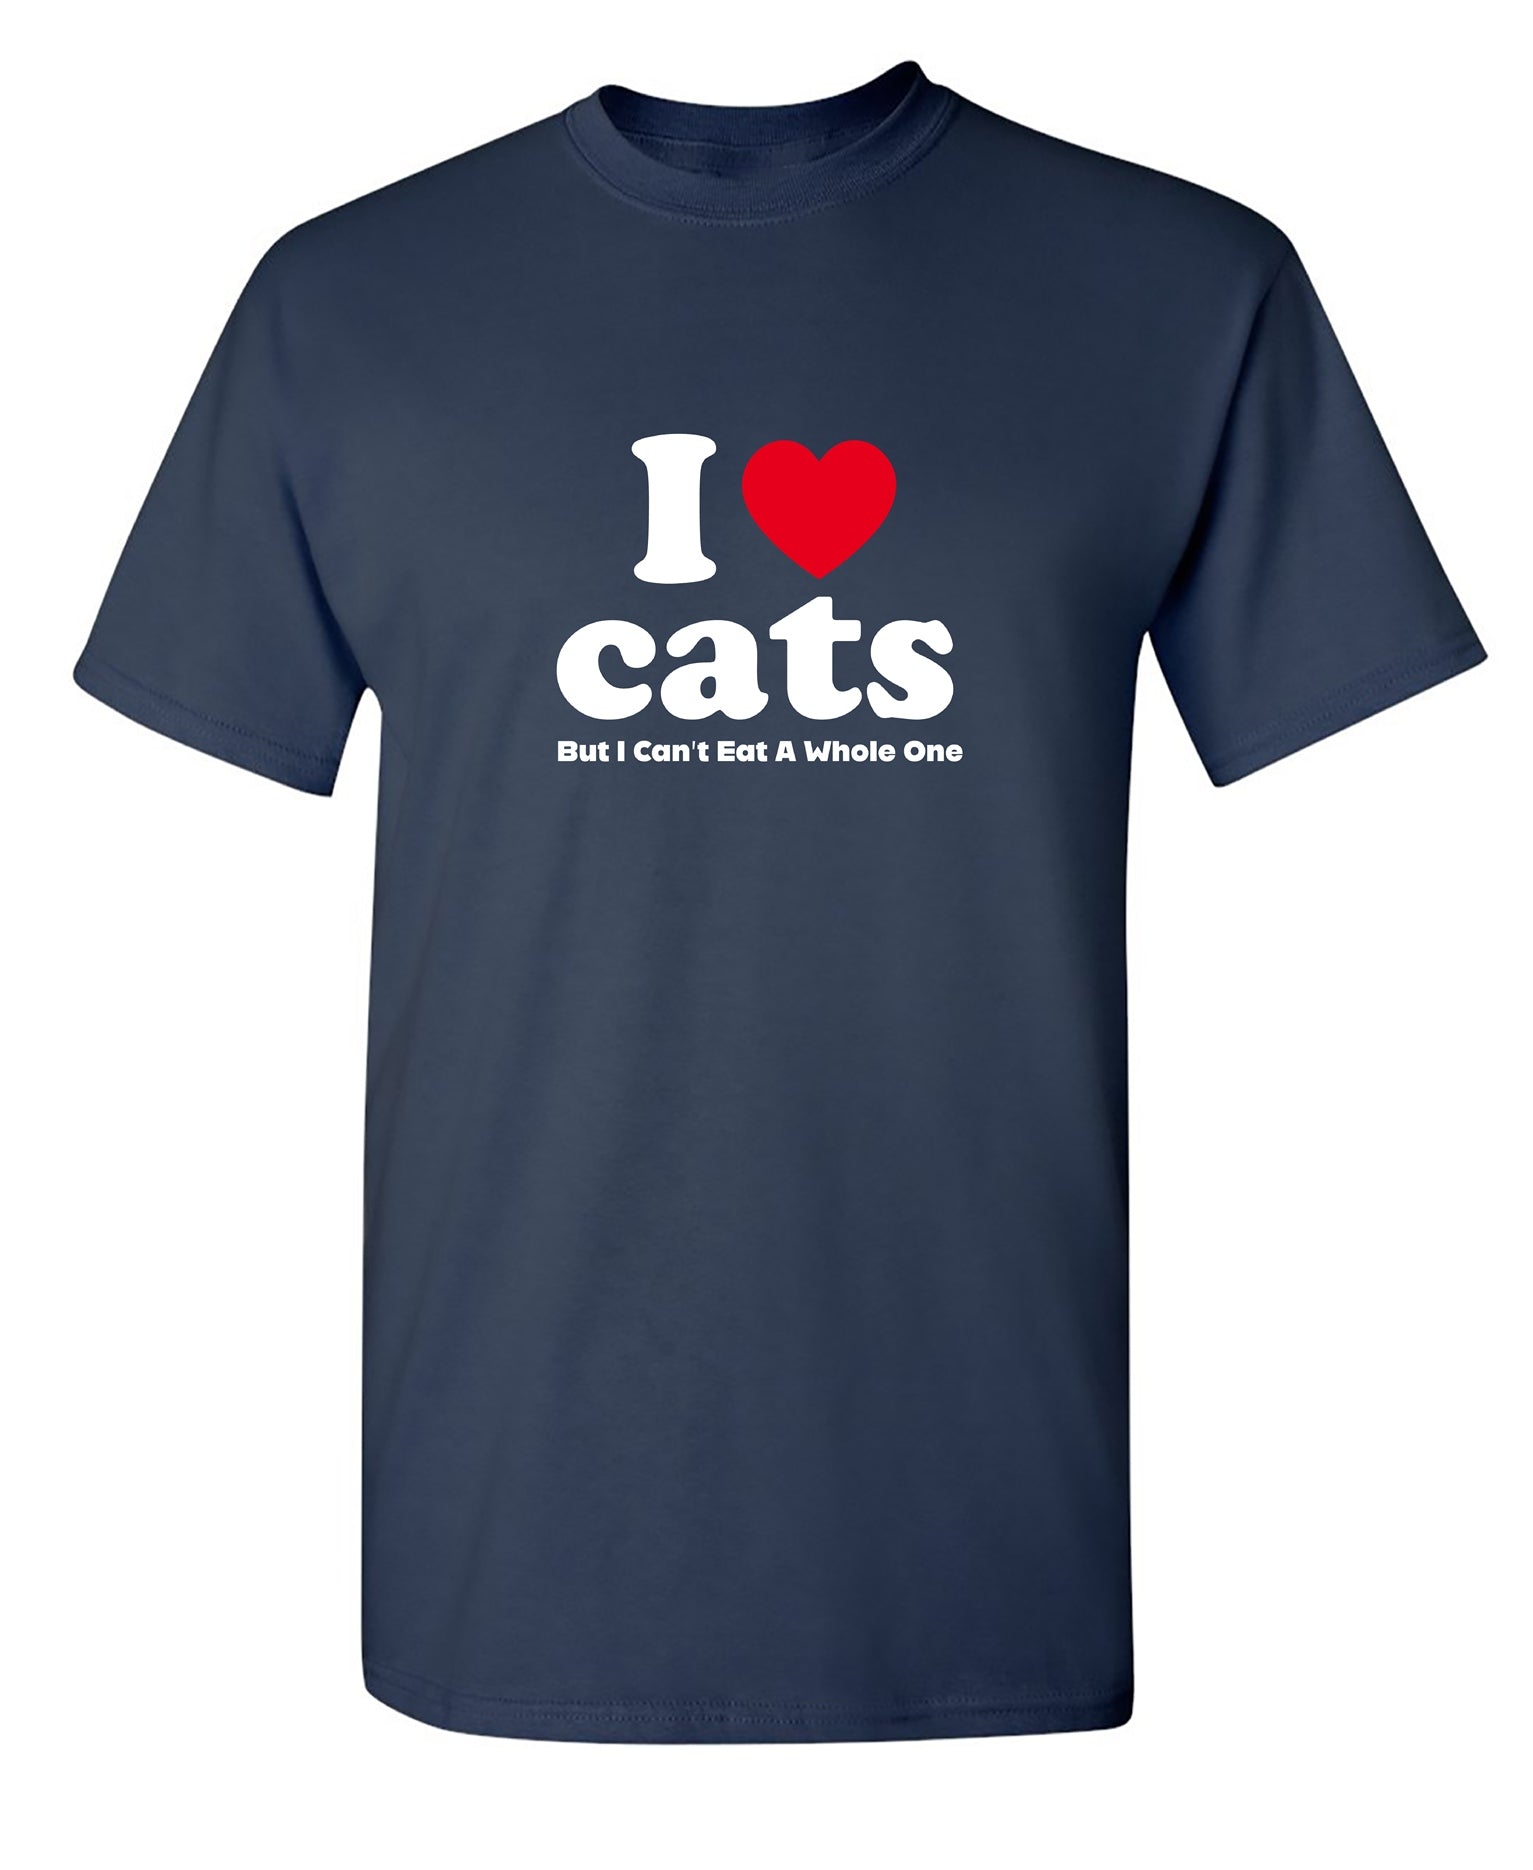 I Loves Cats But I Can't Eat A Whole One - Funny T Shirts & Graphic Tees